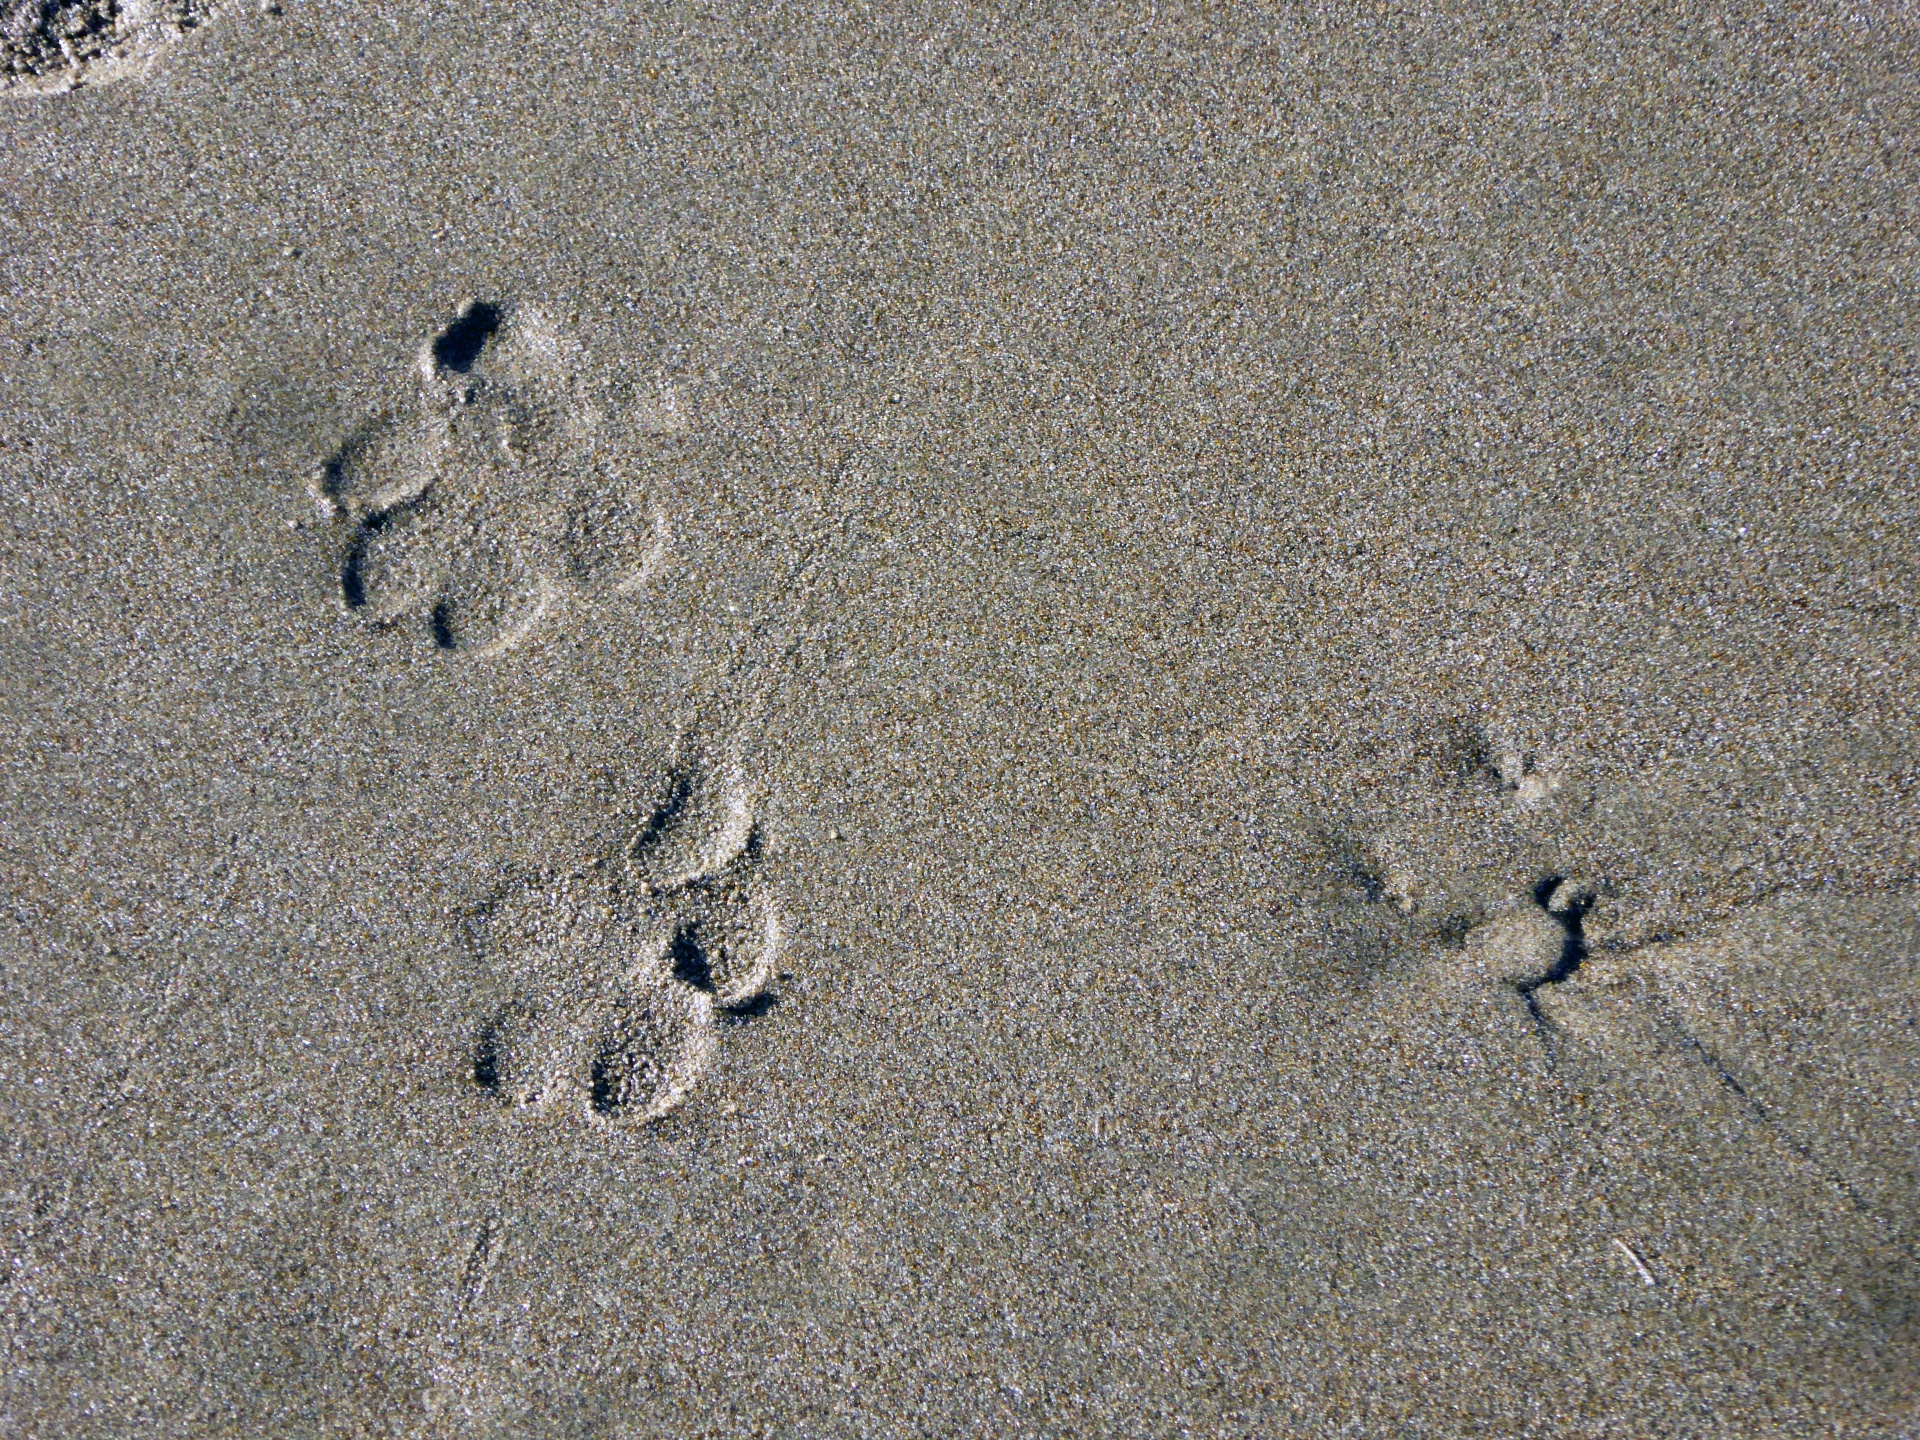 Paws In The Sand